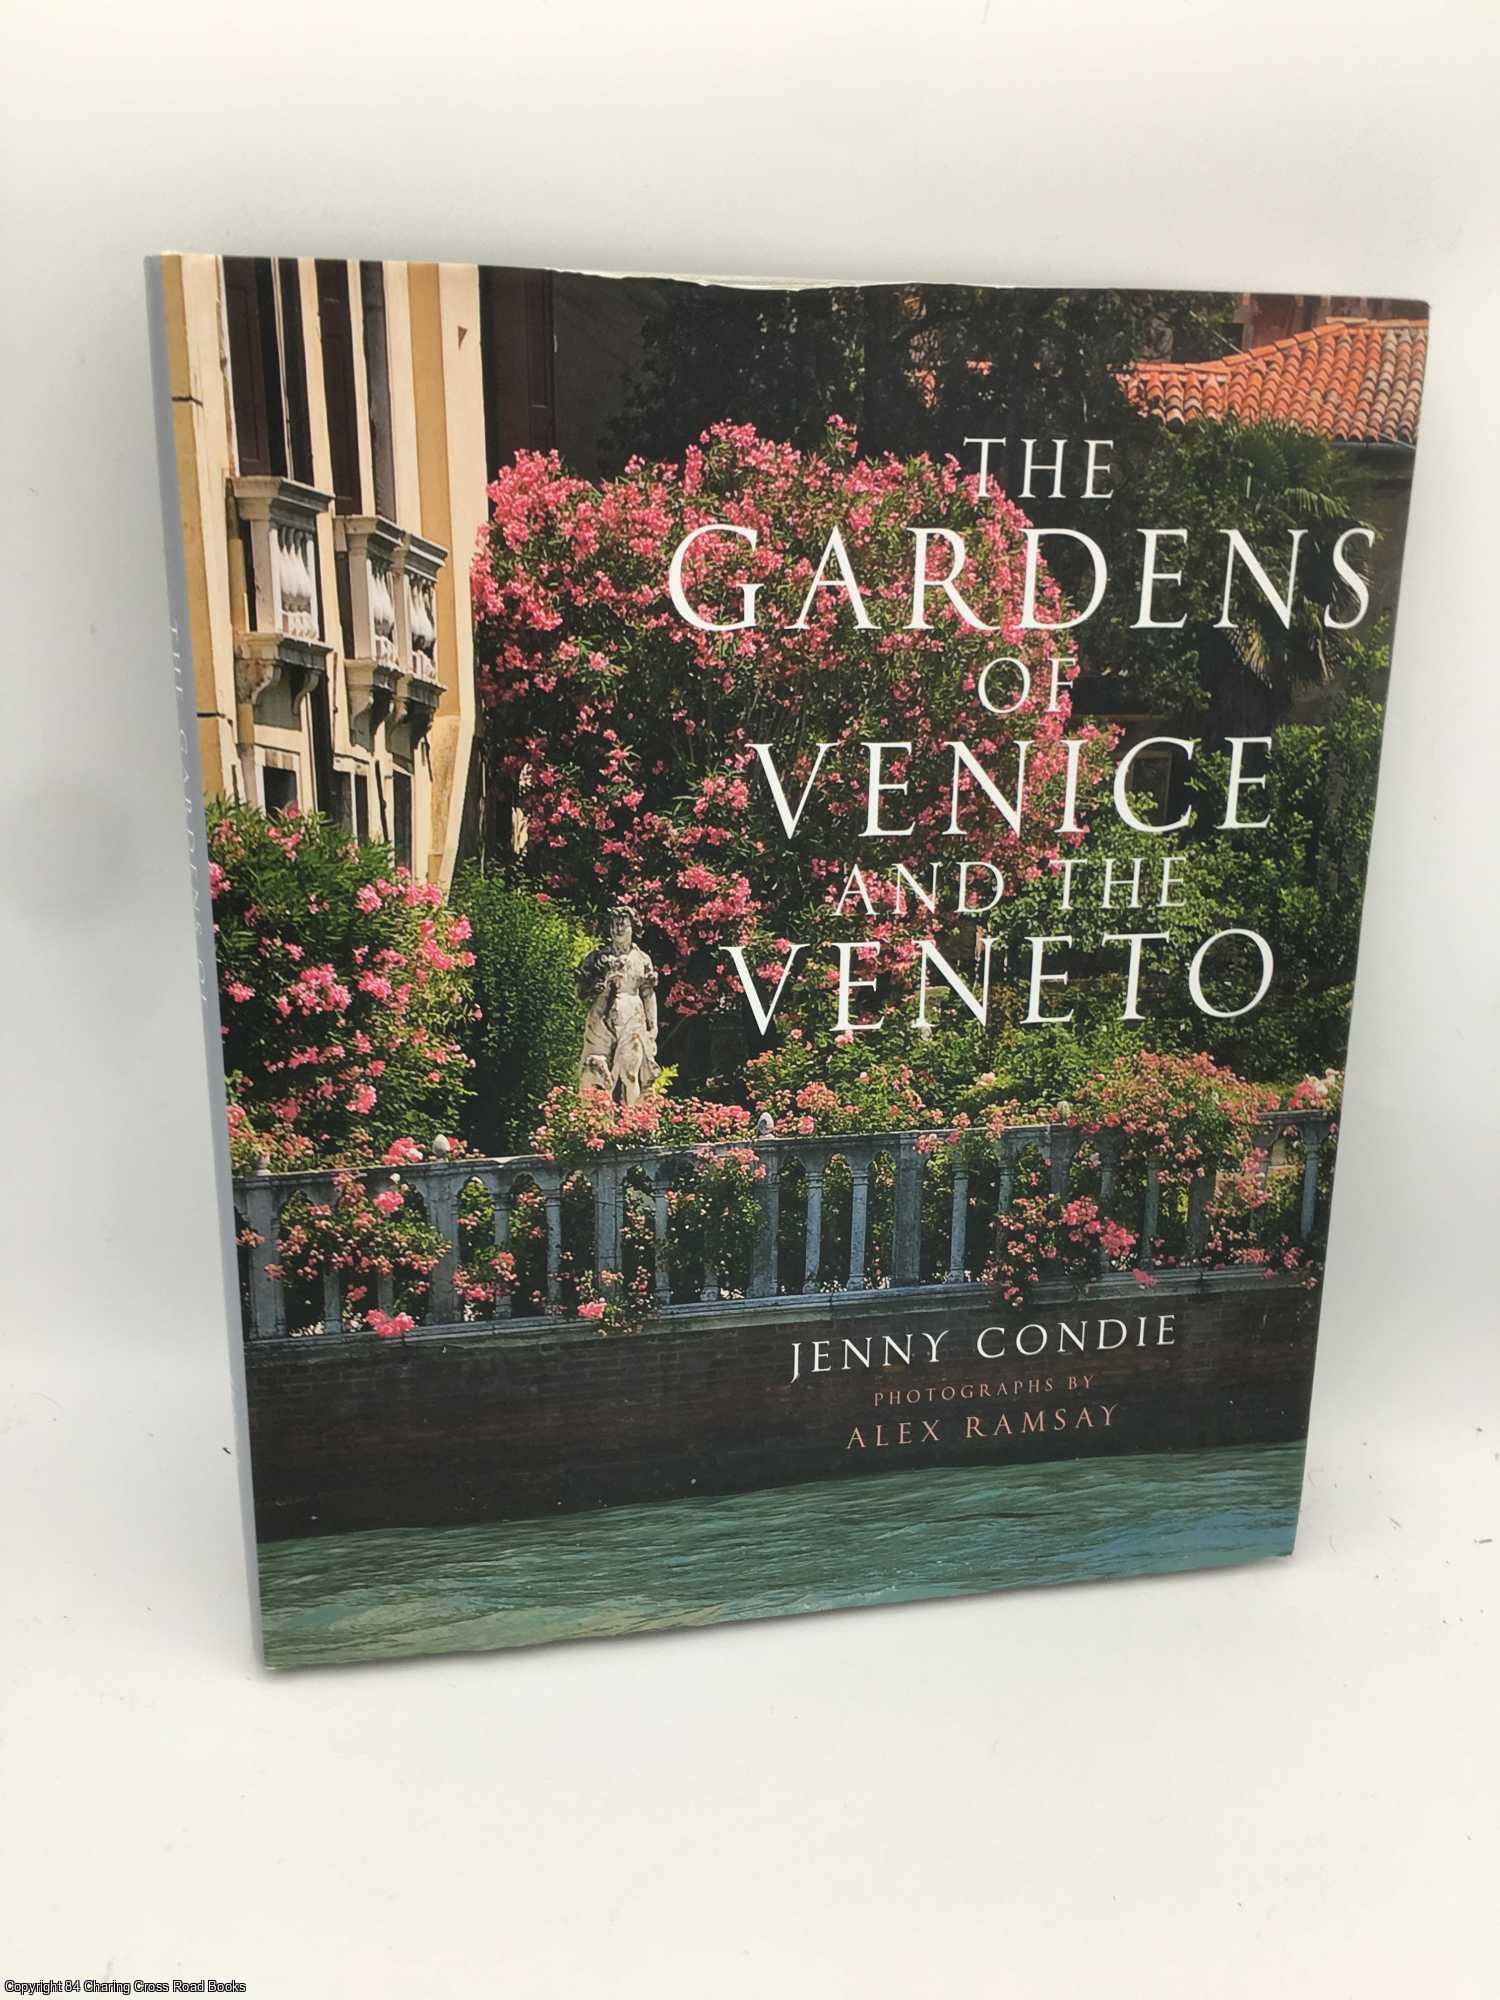 Condie, Jenny - The Gardens of Venice and the Veneto